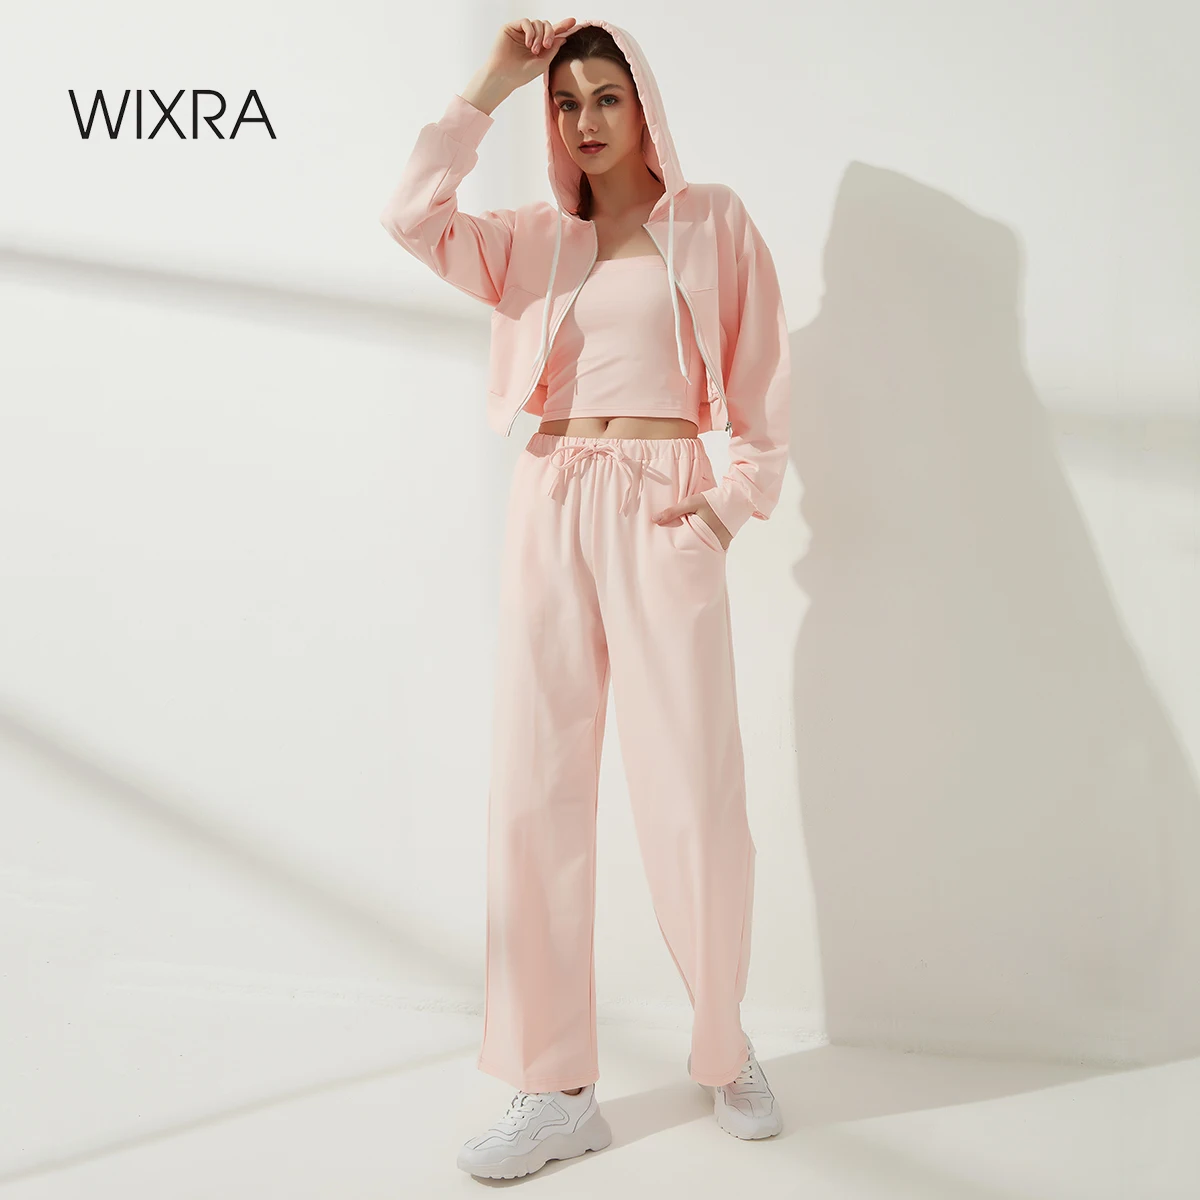 Wixra Womens Stylish Sweatshirts Sets Cotton Street Style Hooded Zip-Up Top+Straight Pants Hot Casual 3 Pcs Suits